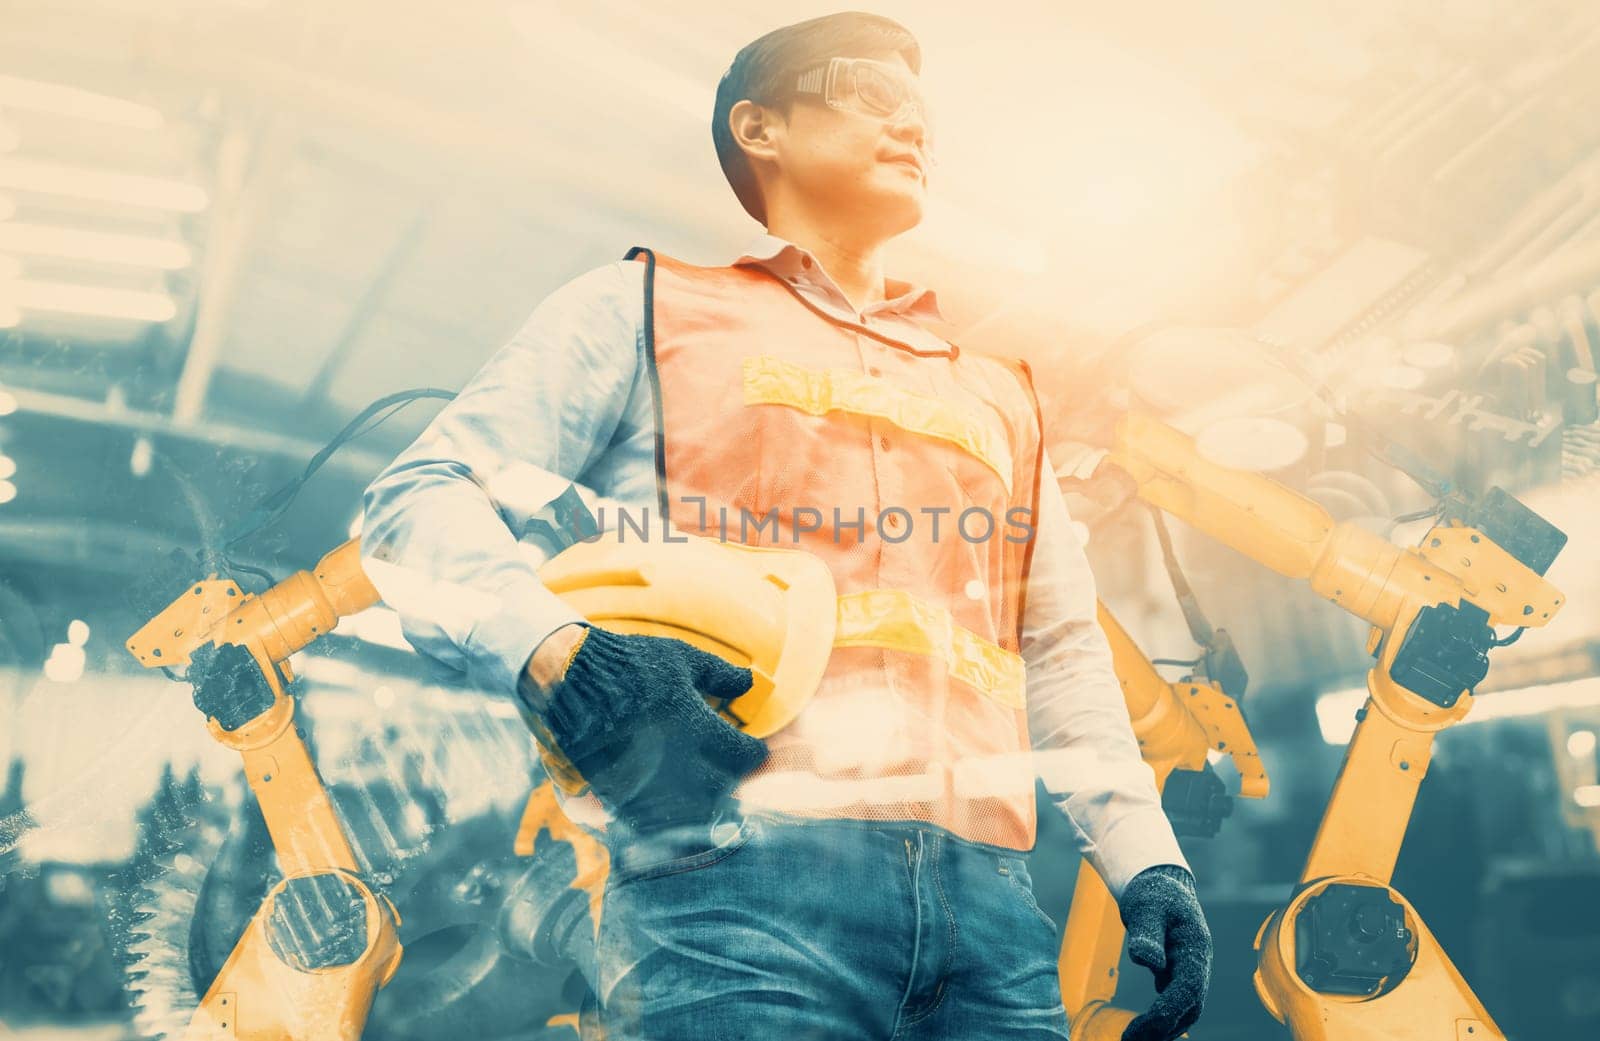 MLB Mechanized industry robot arm and factory worker double exposure. Concept of robotics technology for industrial revolution and automated manufacturing process.